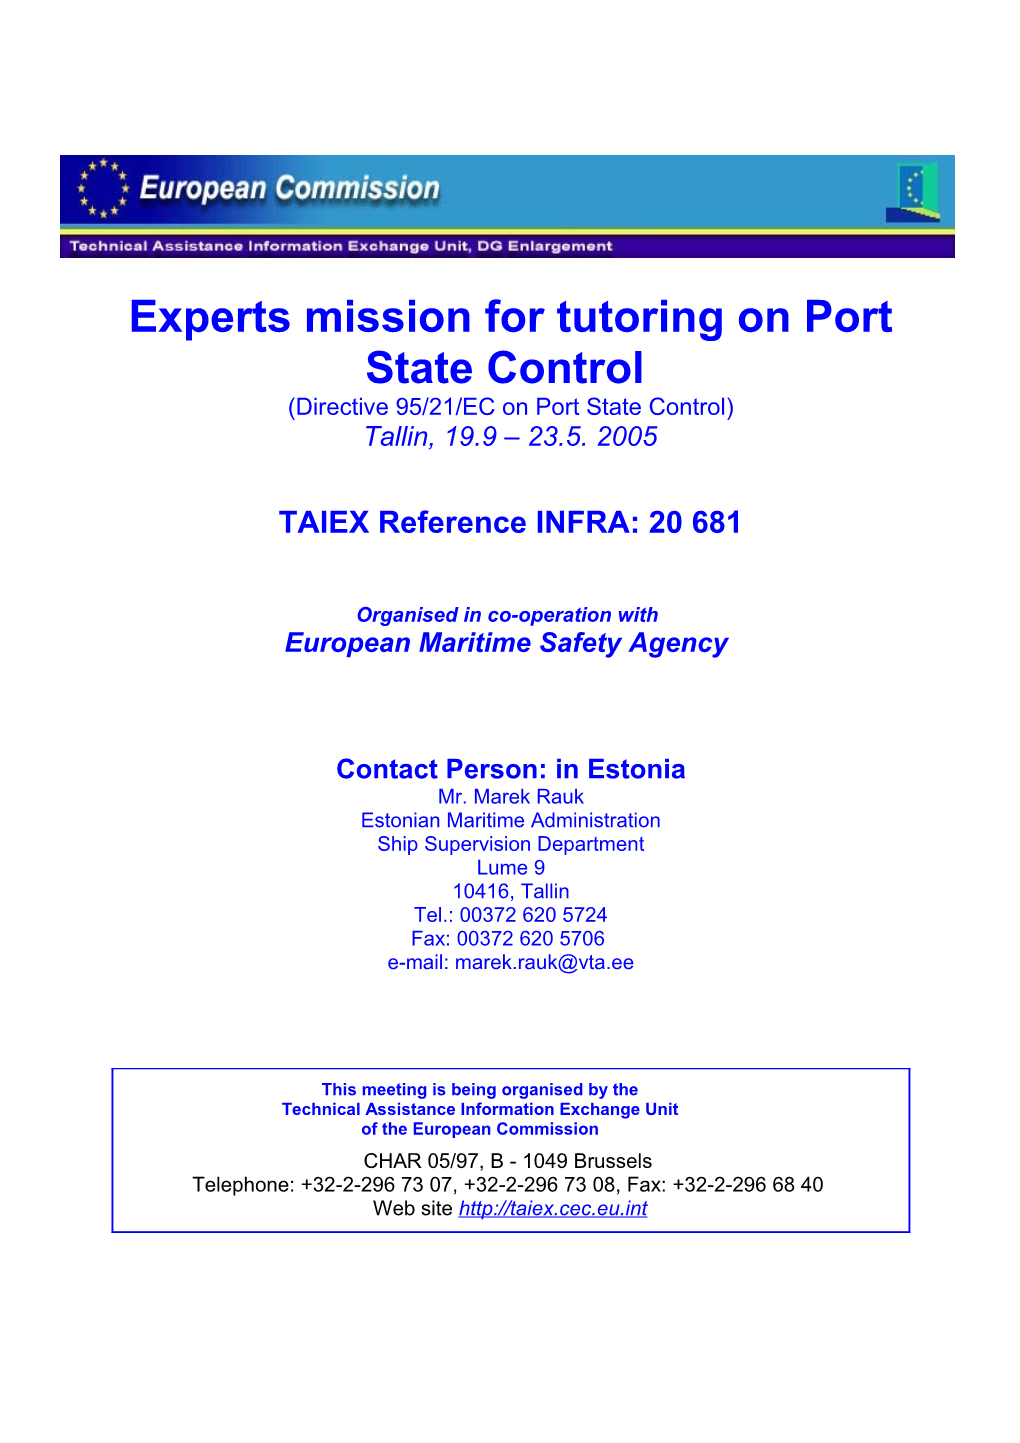 Experts Mission for Tutoring on Port State Control